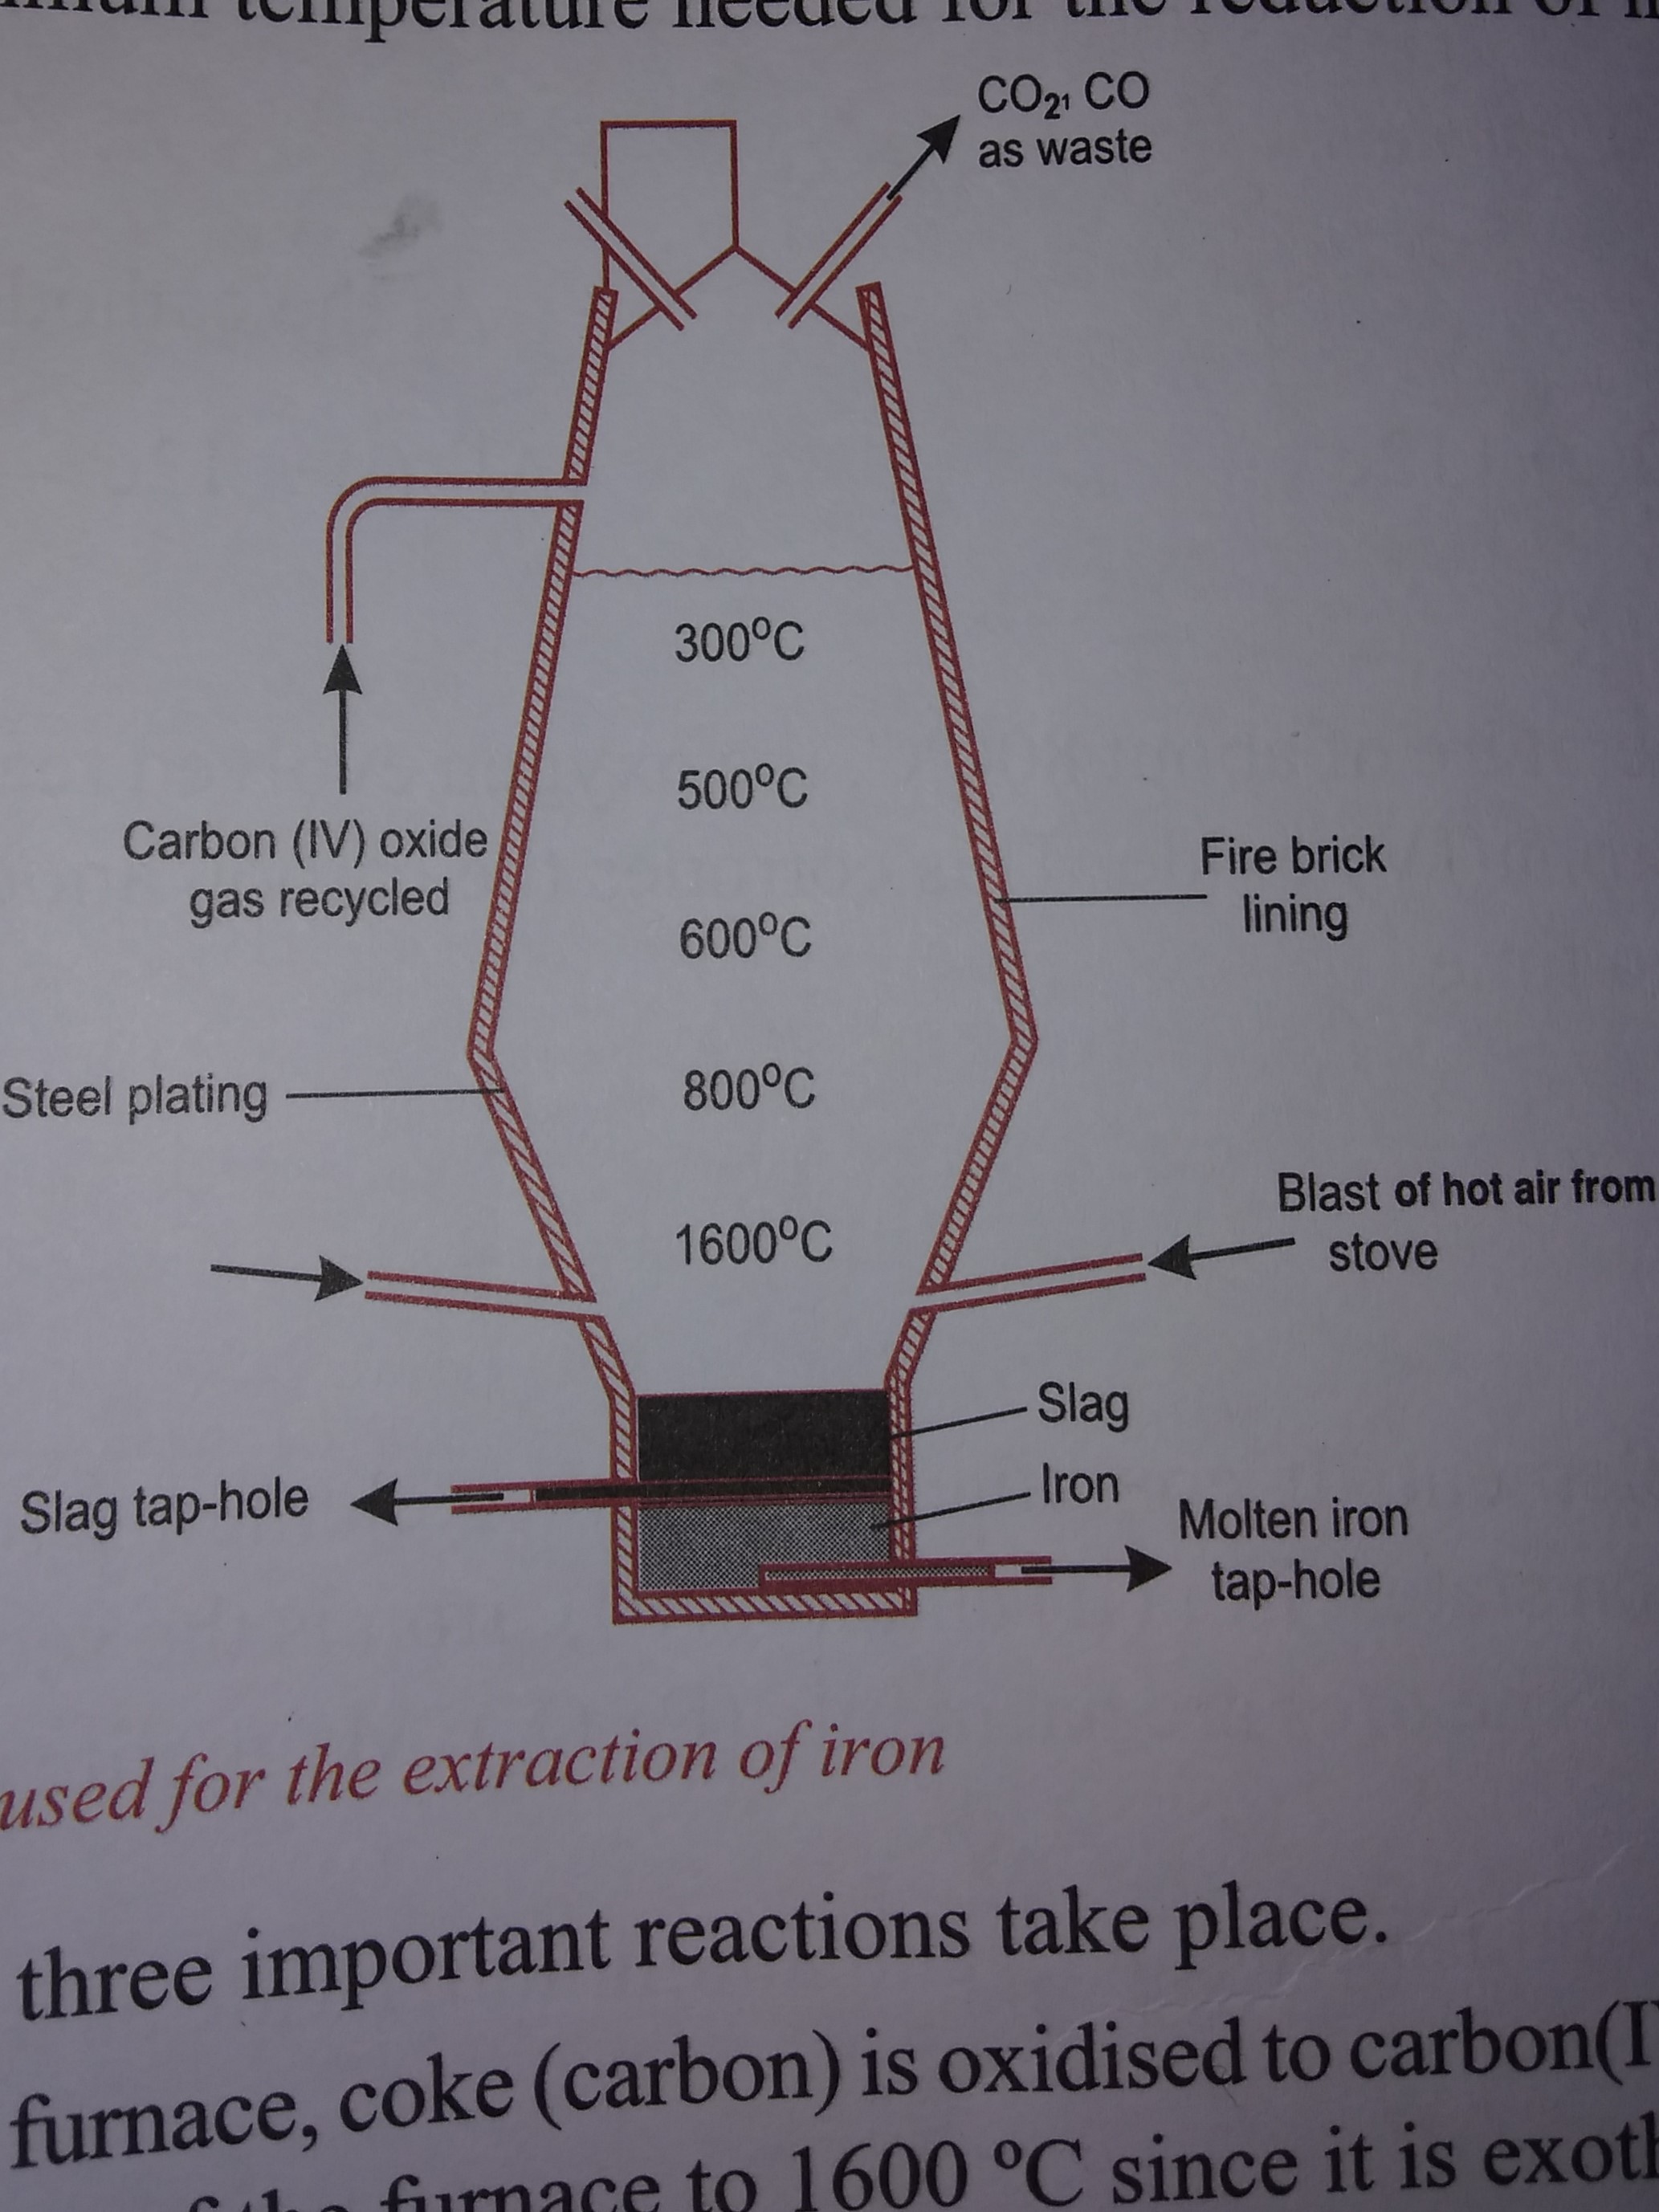 The blast furnace for the extraction of Iron